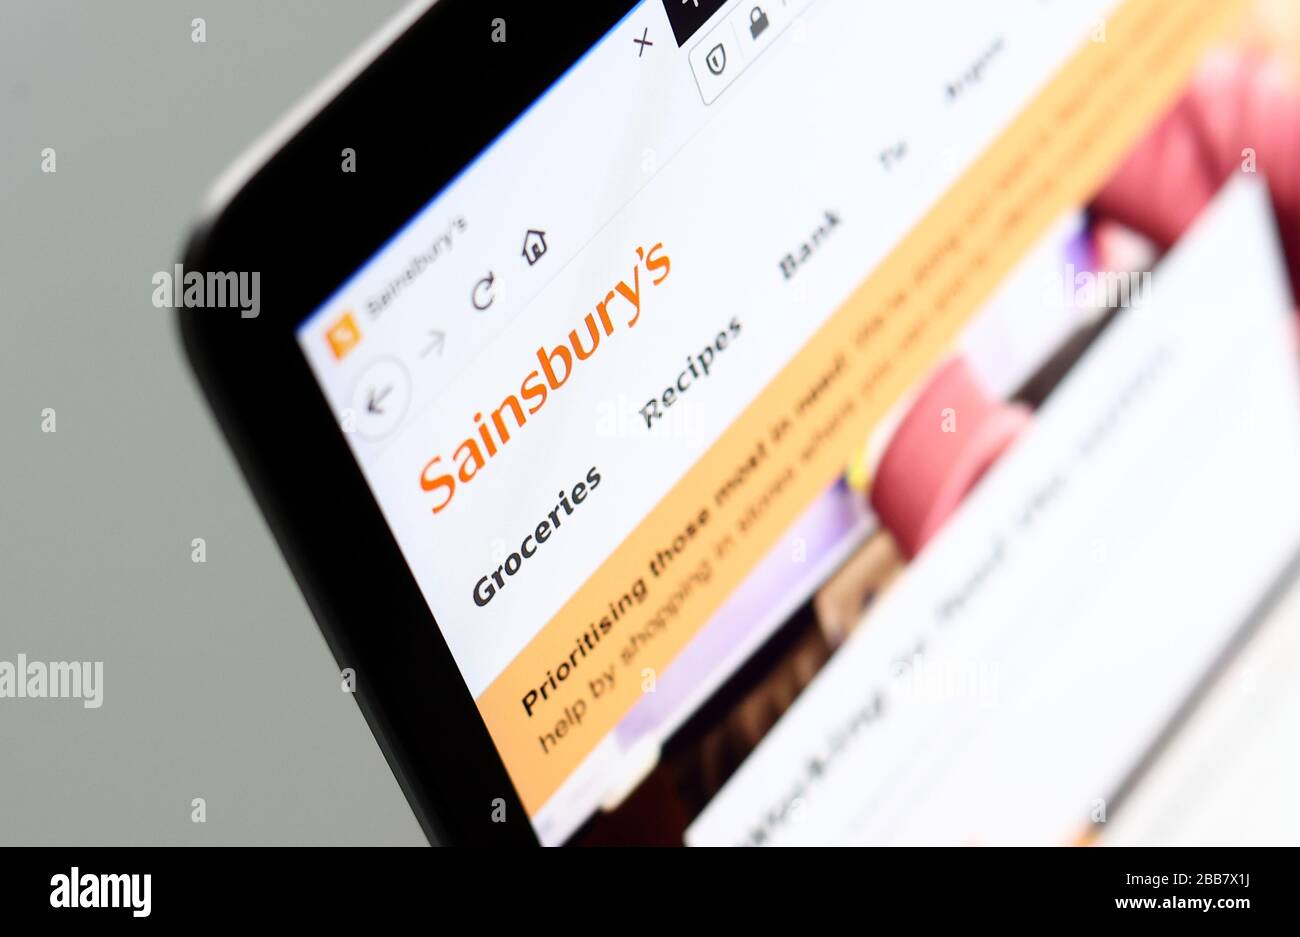 The Sainsbury's website is pictured on a laptop as Supermarket websites are overwhelmed by online orders during the COVID-19 Coronavirus pandemic as the UK continues in lockdown to help curb the spread of the coronavirus. Stock Photo